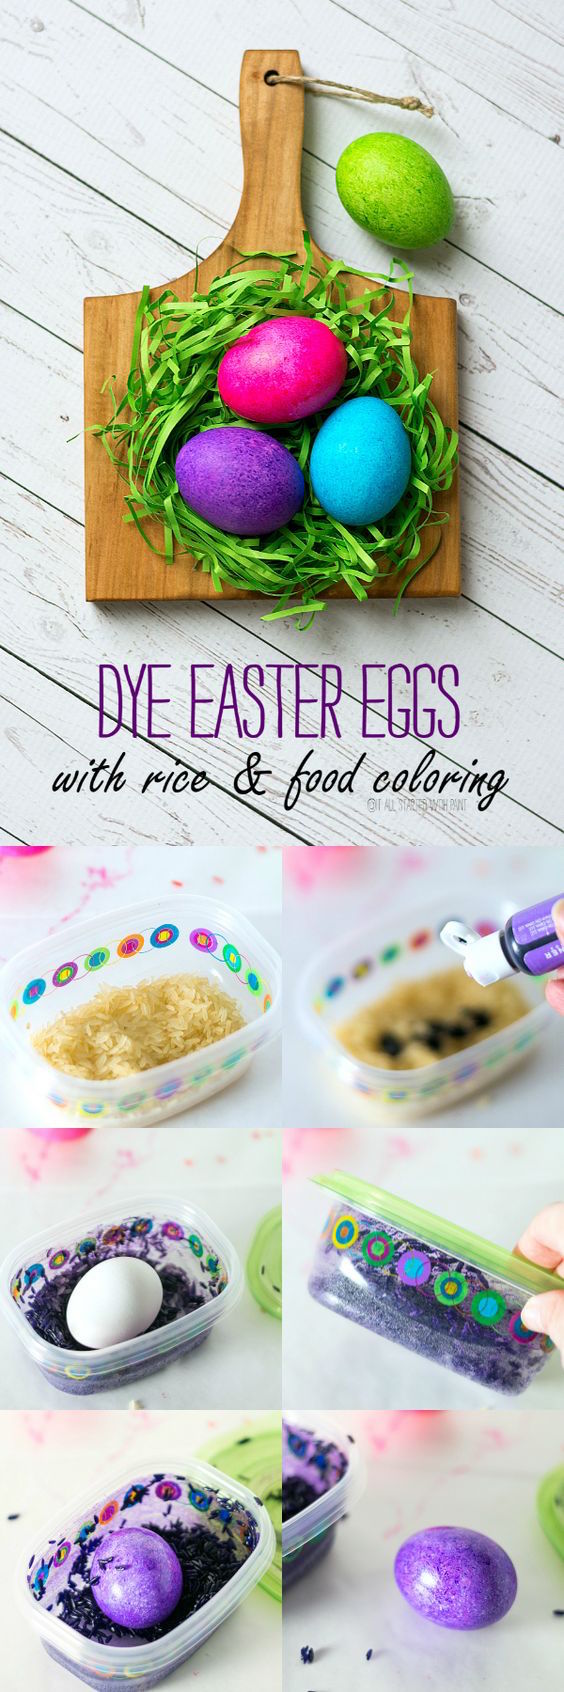 Dyed Easter eggs with rice